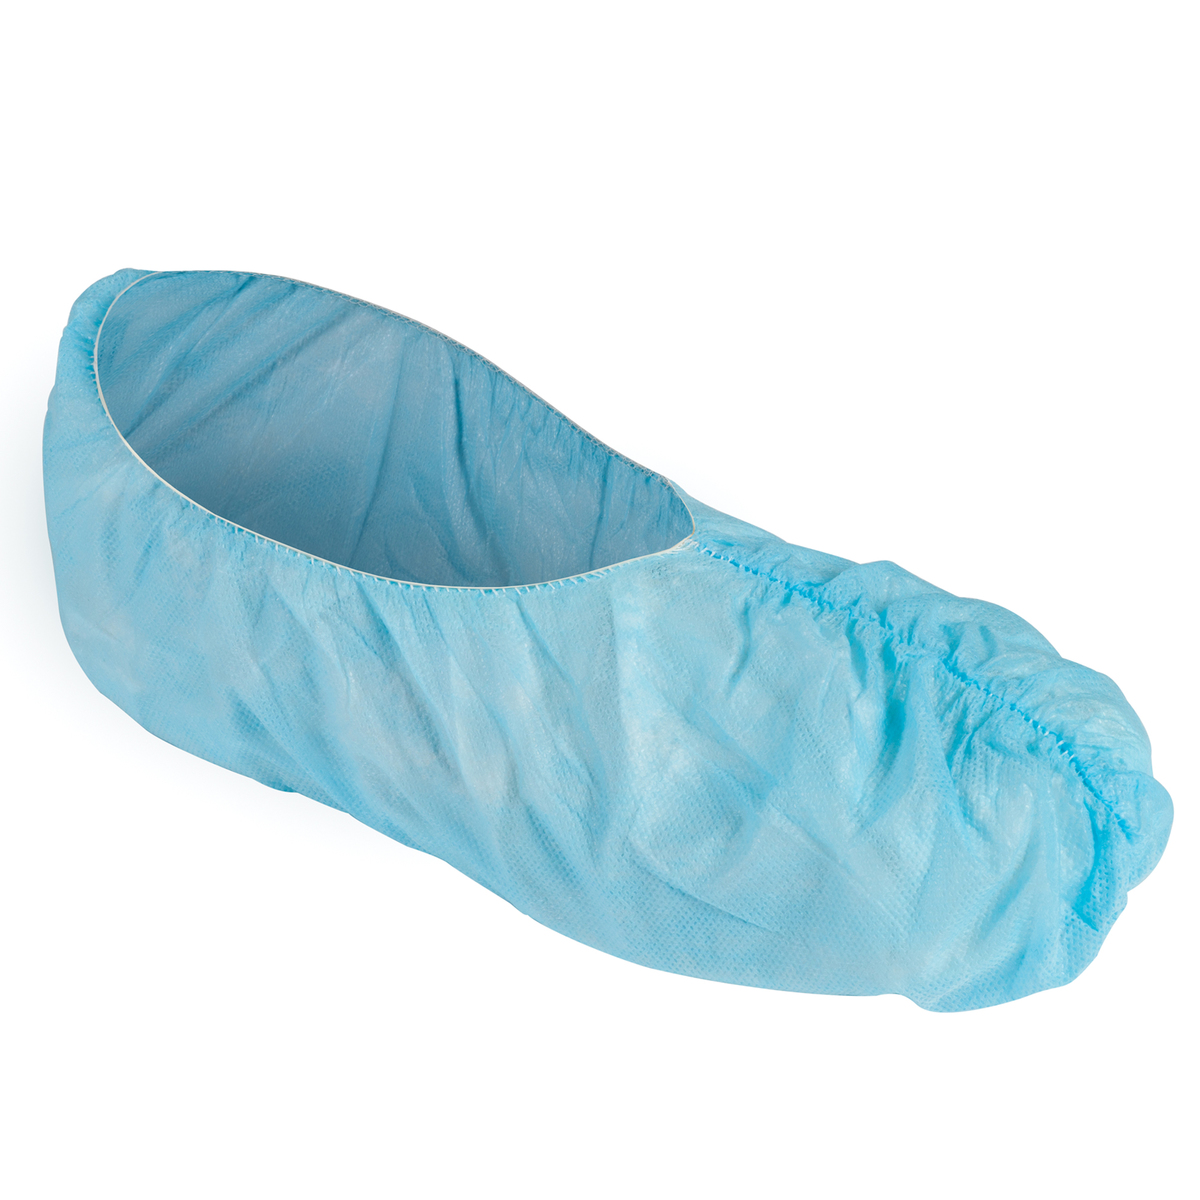 Kimberly-Clark Professional™ X-Large Blue KleenGuard™ A10 Polypropylene Disposable Shoe Cover (Availability restrictions apply.)